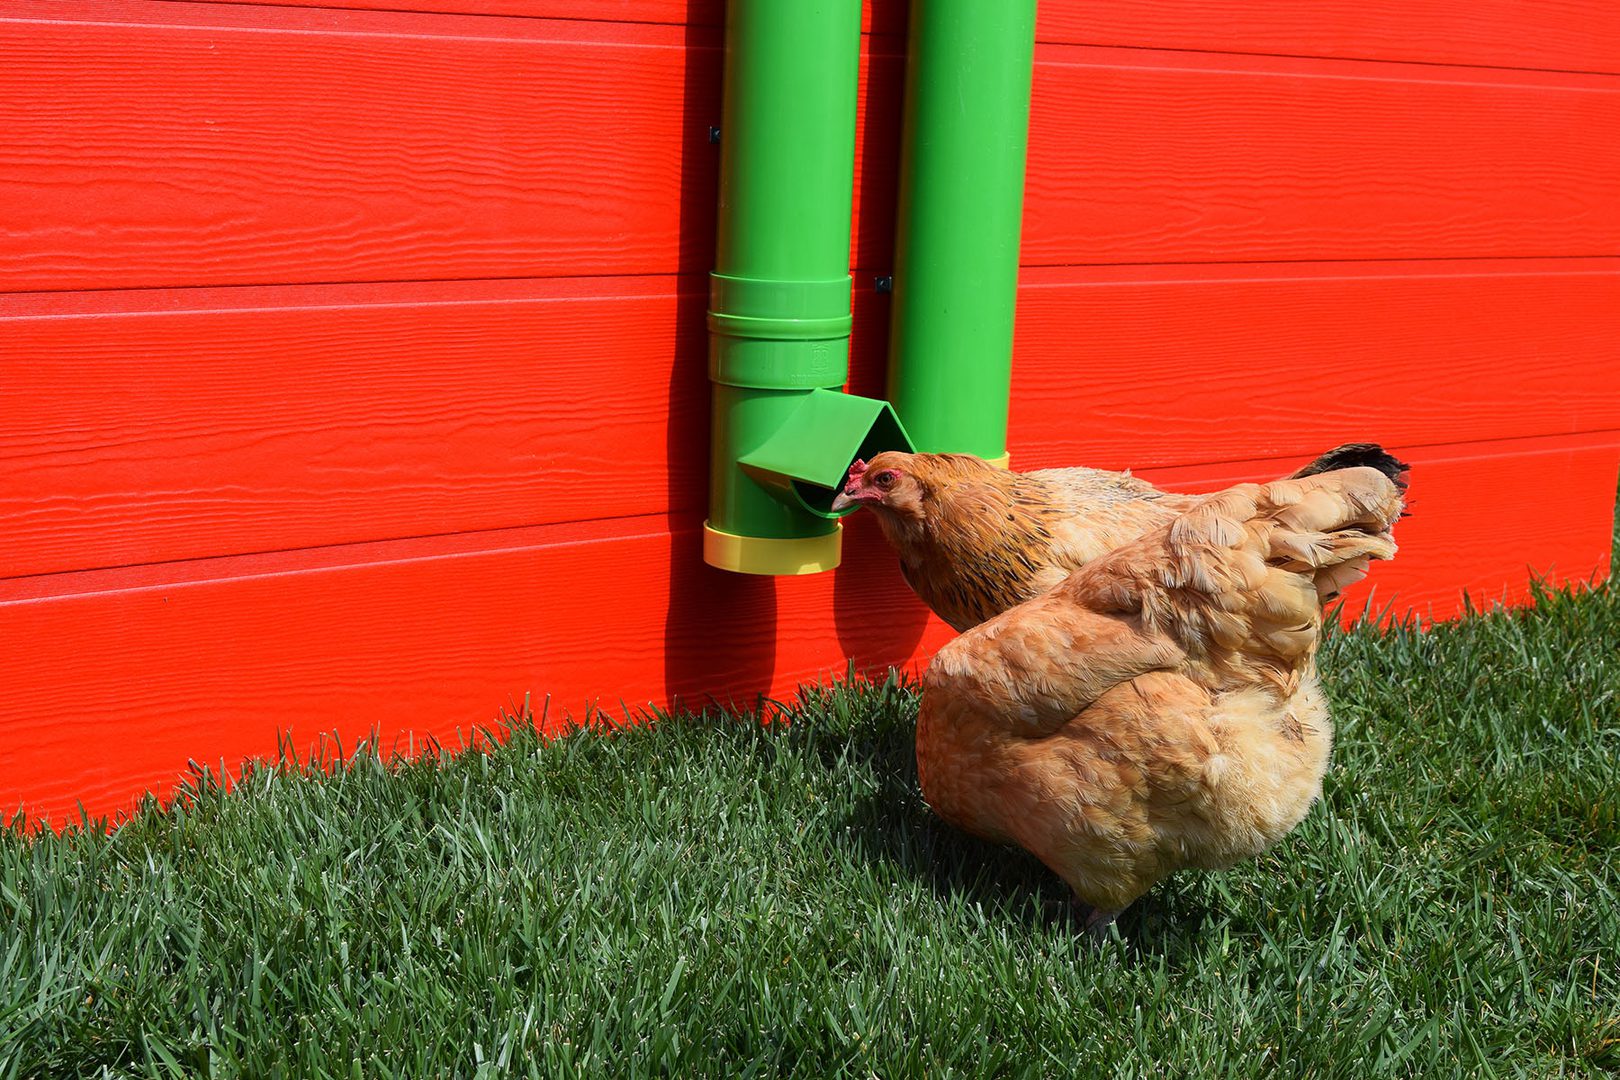 A chicken using the poultry feeder